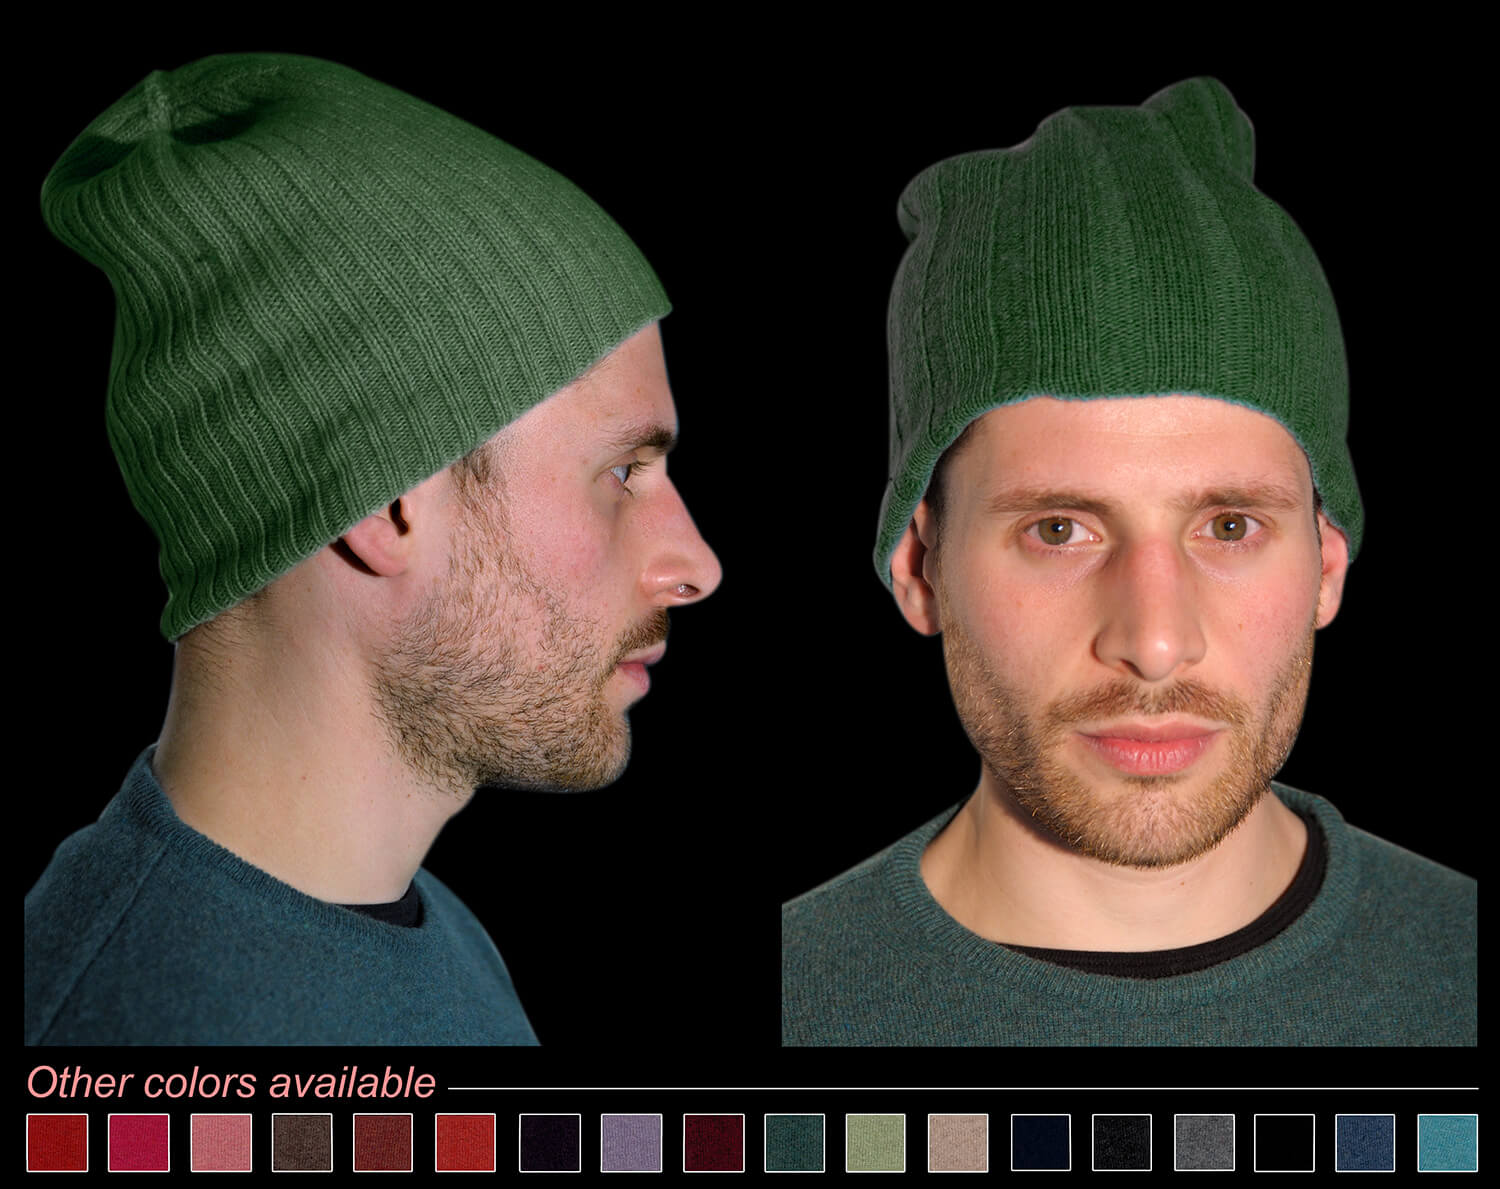 Man hat color green code 119 and 298